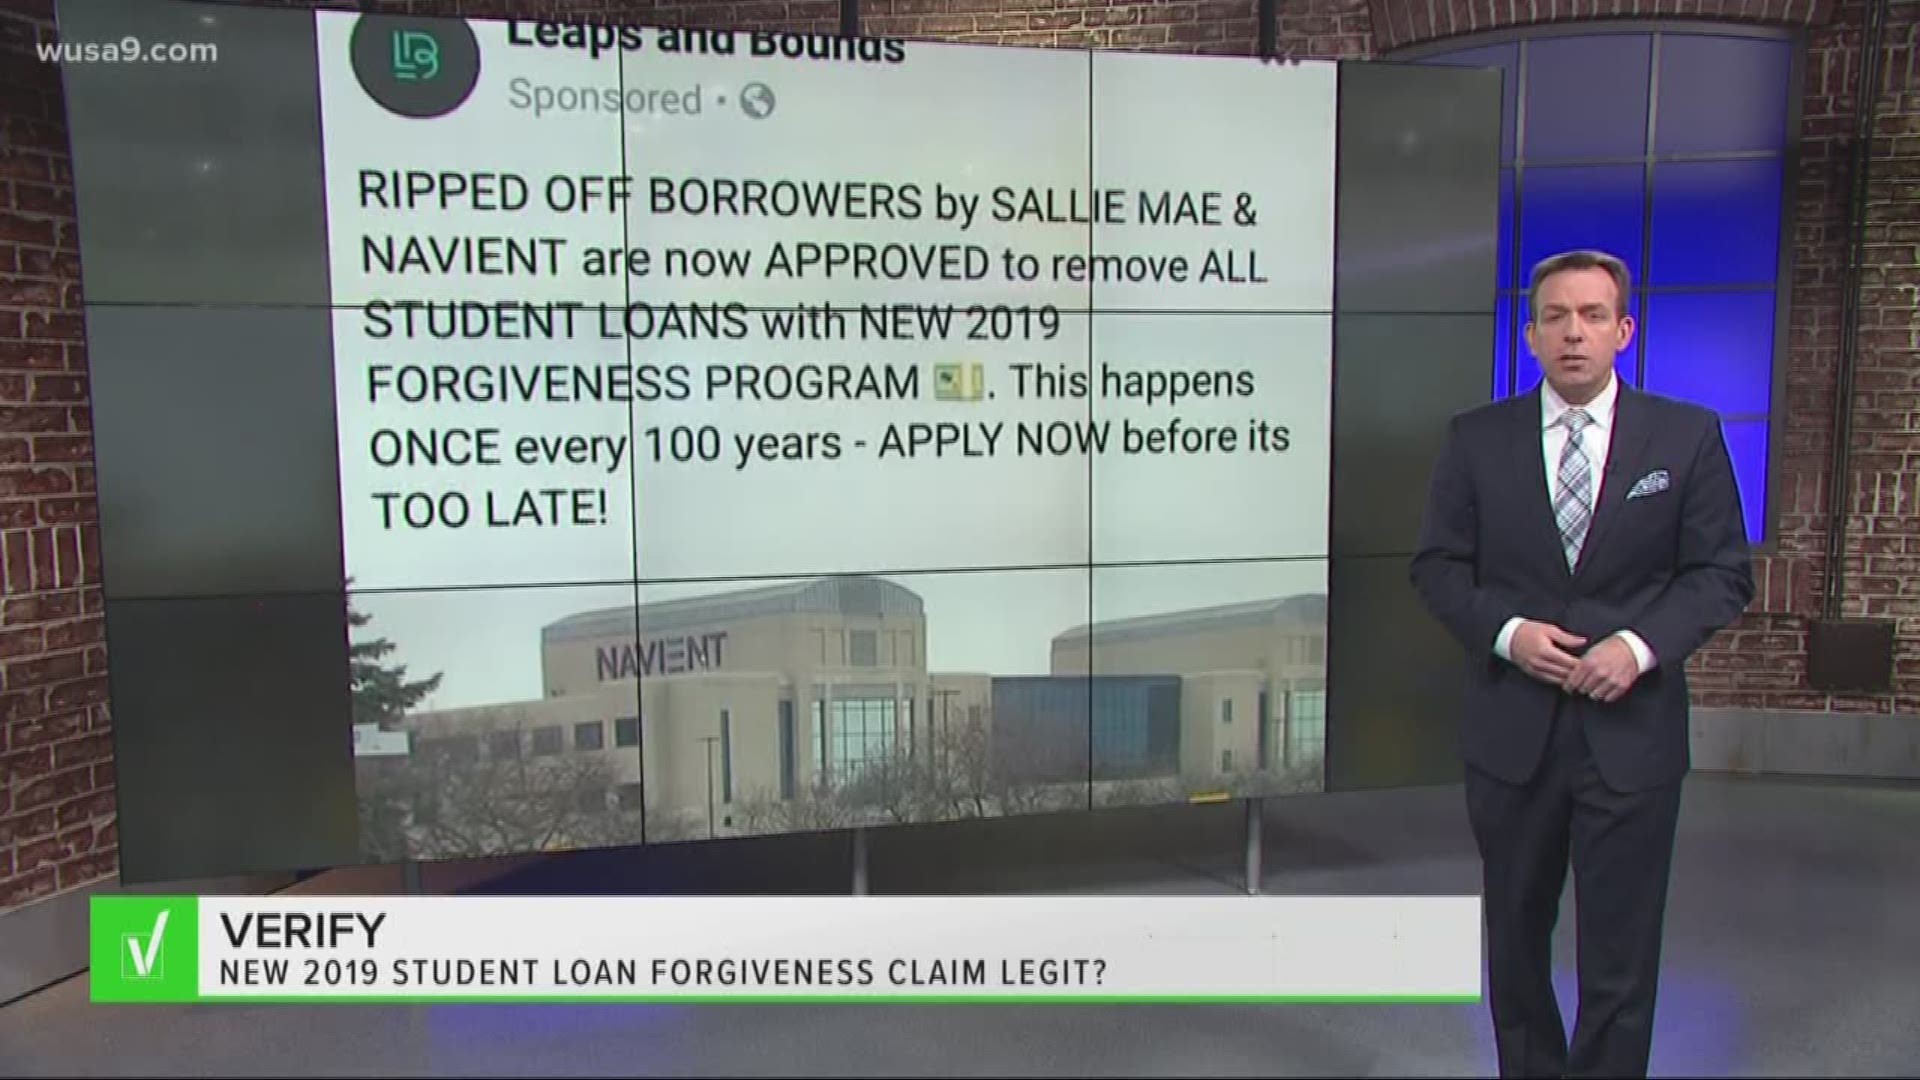 We can verify, this 2019 student loan forgiveness program offer is not legit.